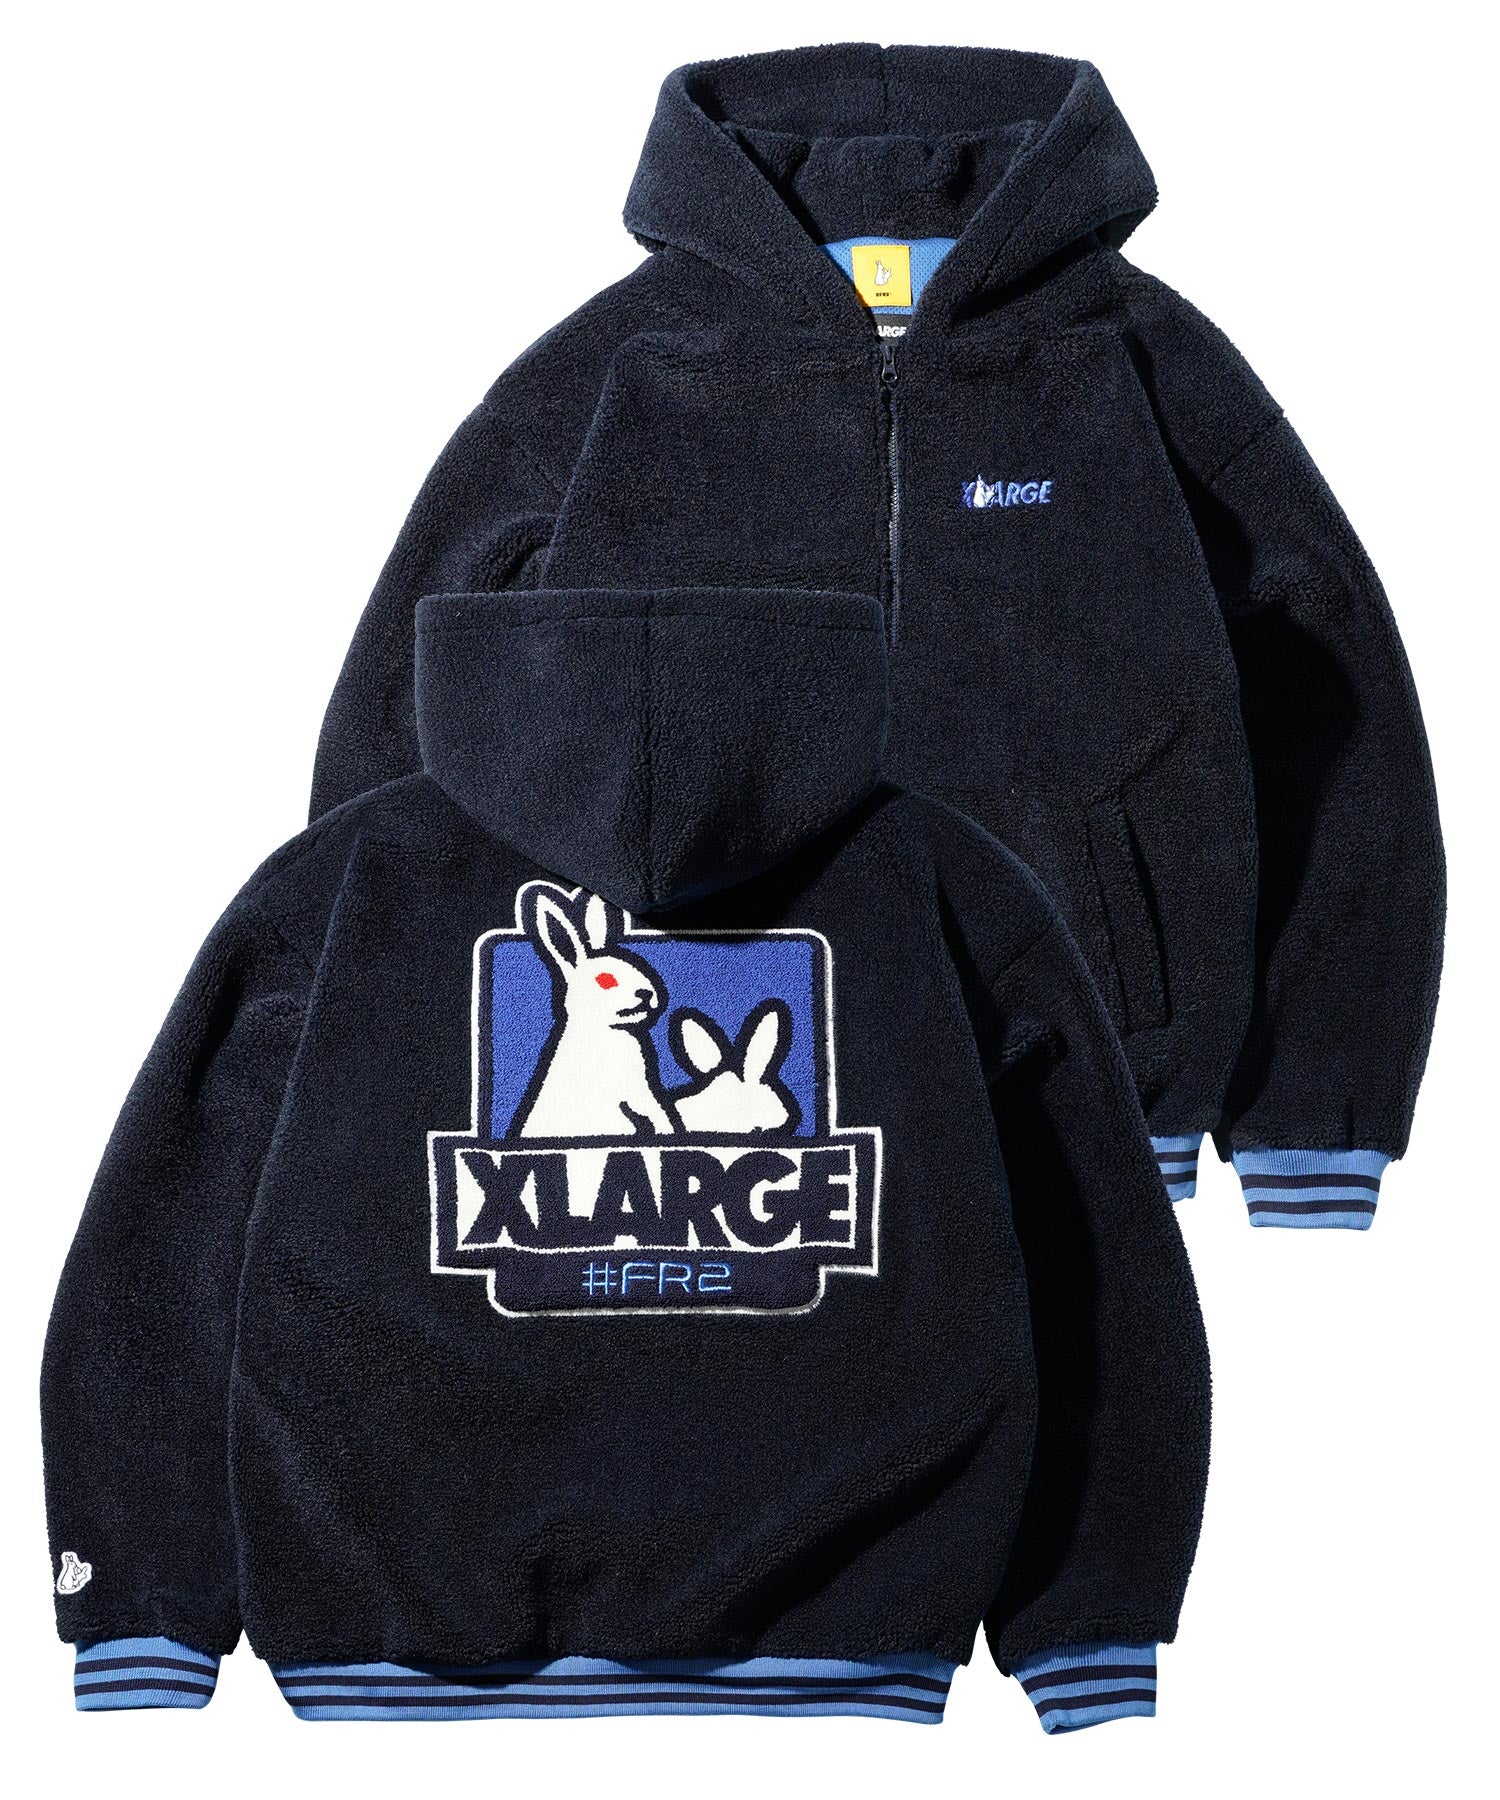 XLARGE collaboration with FR2 Hooodie 新品